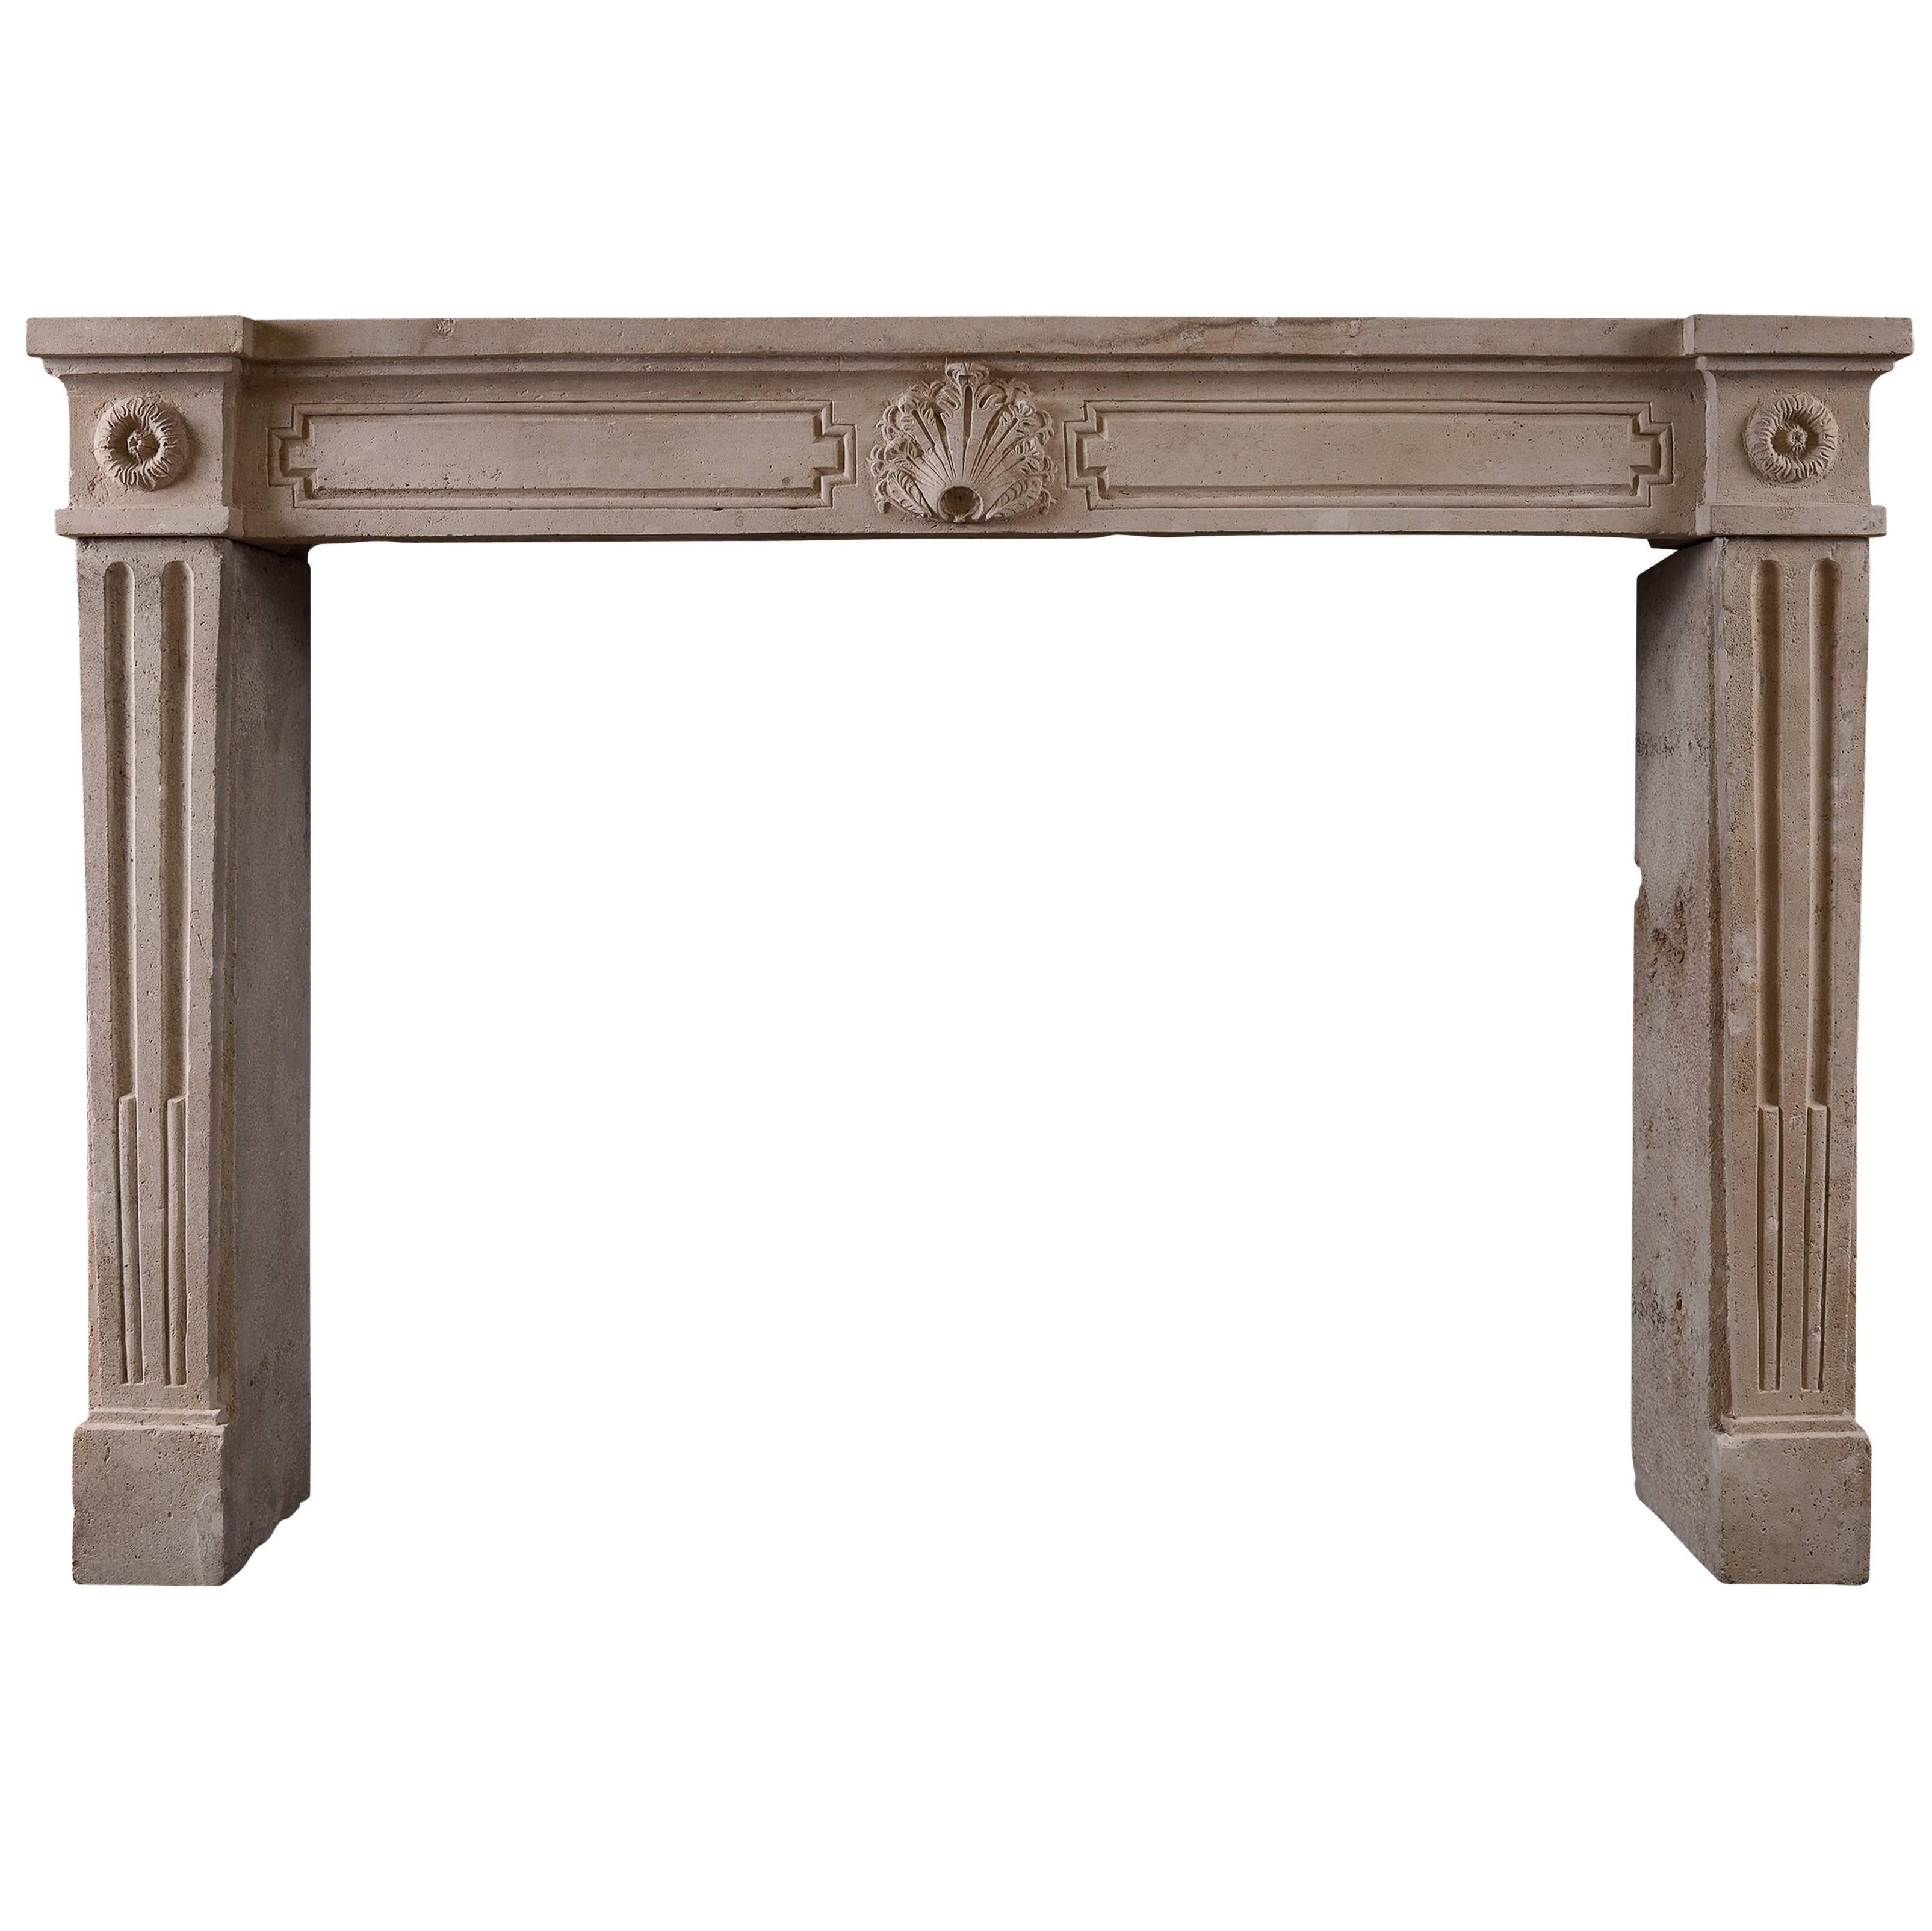 Rustic French Louis XVI Antique Fireplace